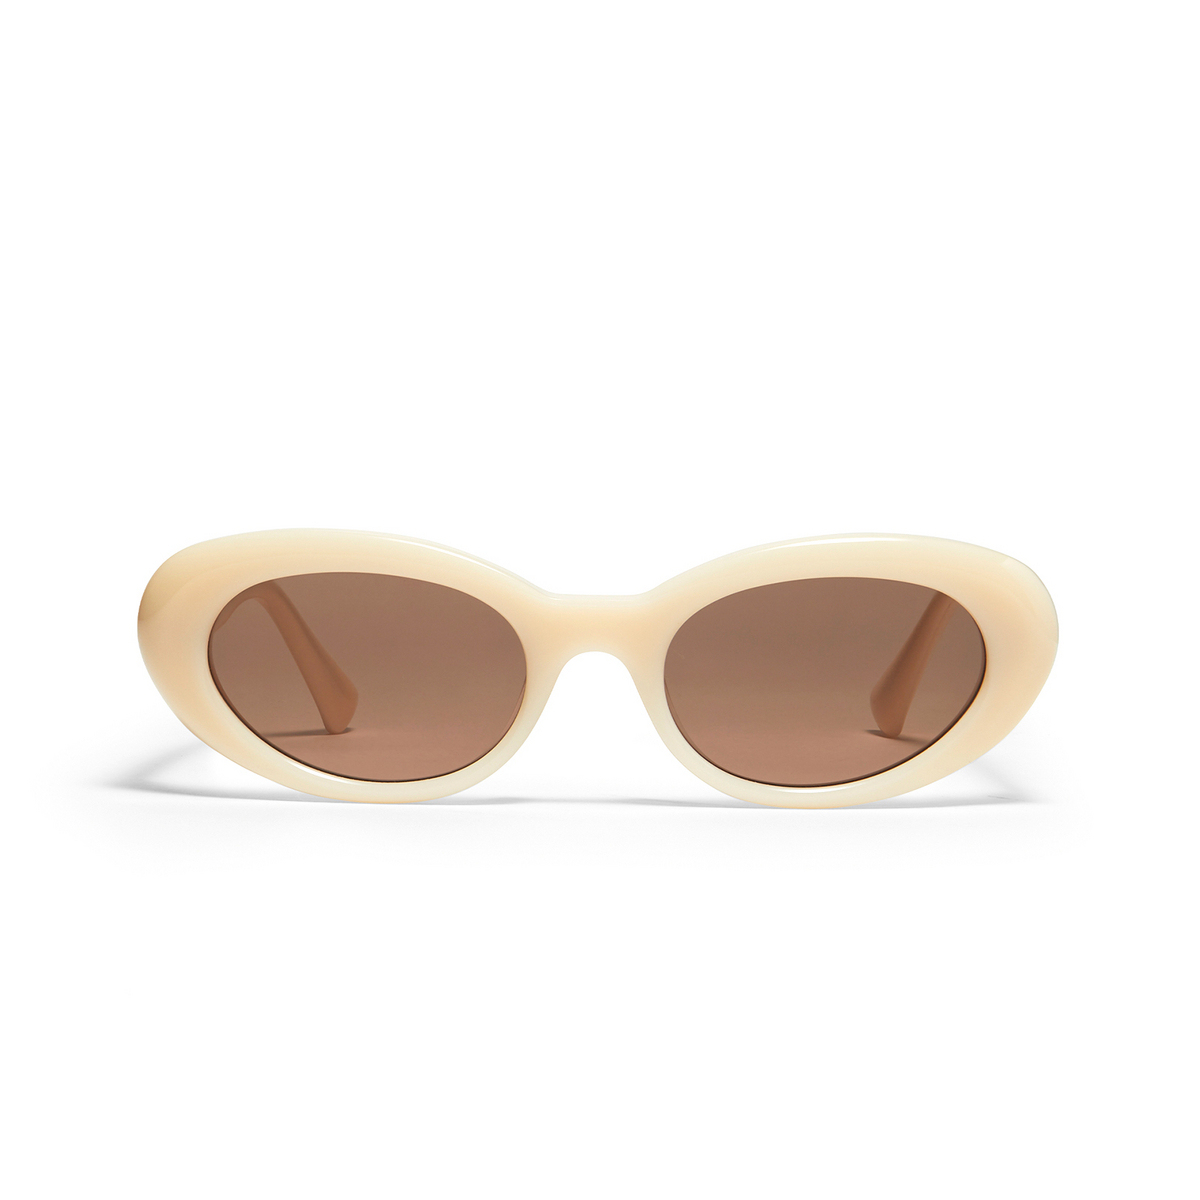 Gentle Monster® Cat-eye Sunglasses: Le color Ivory IV1 - front view.